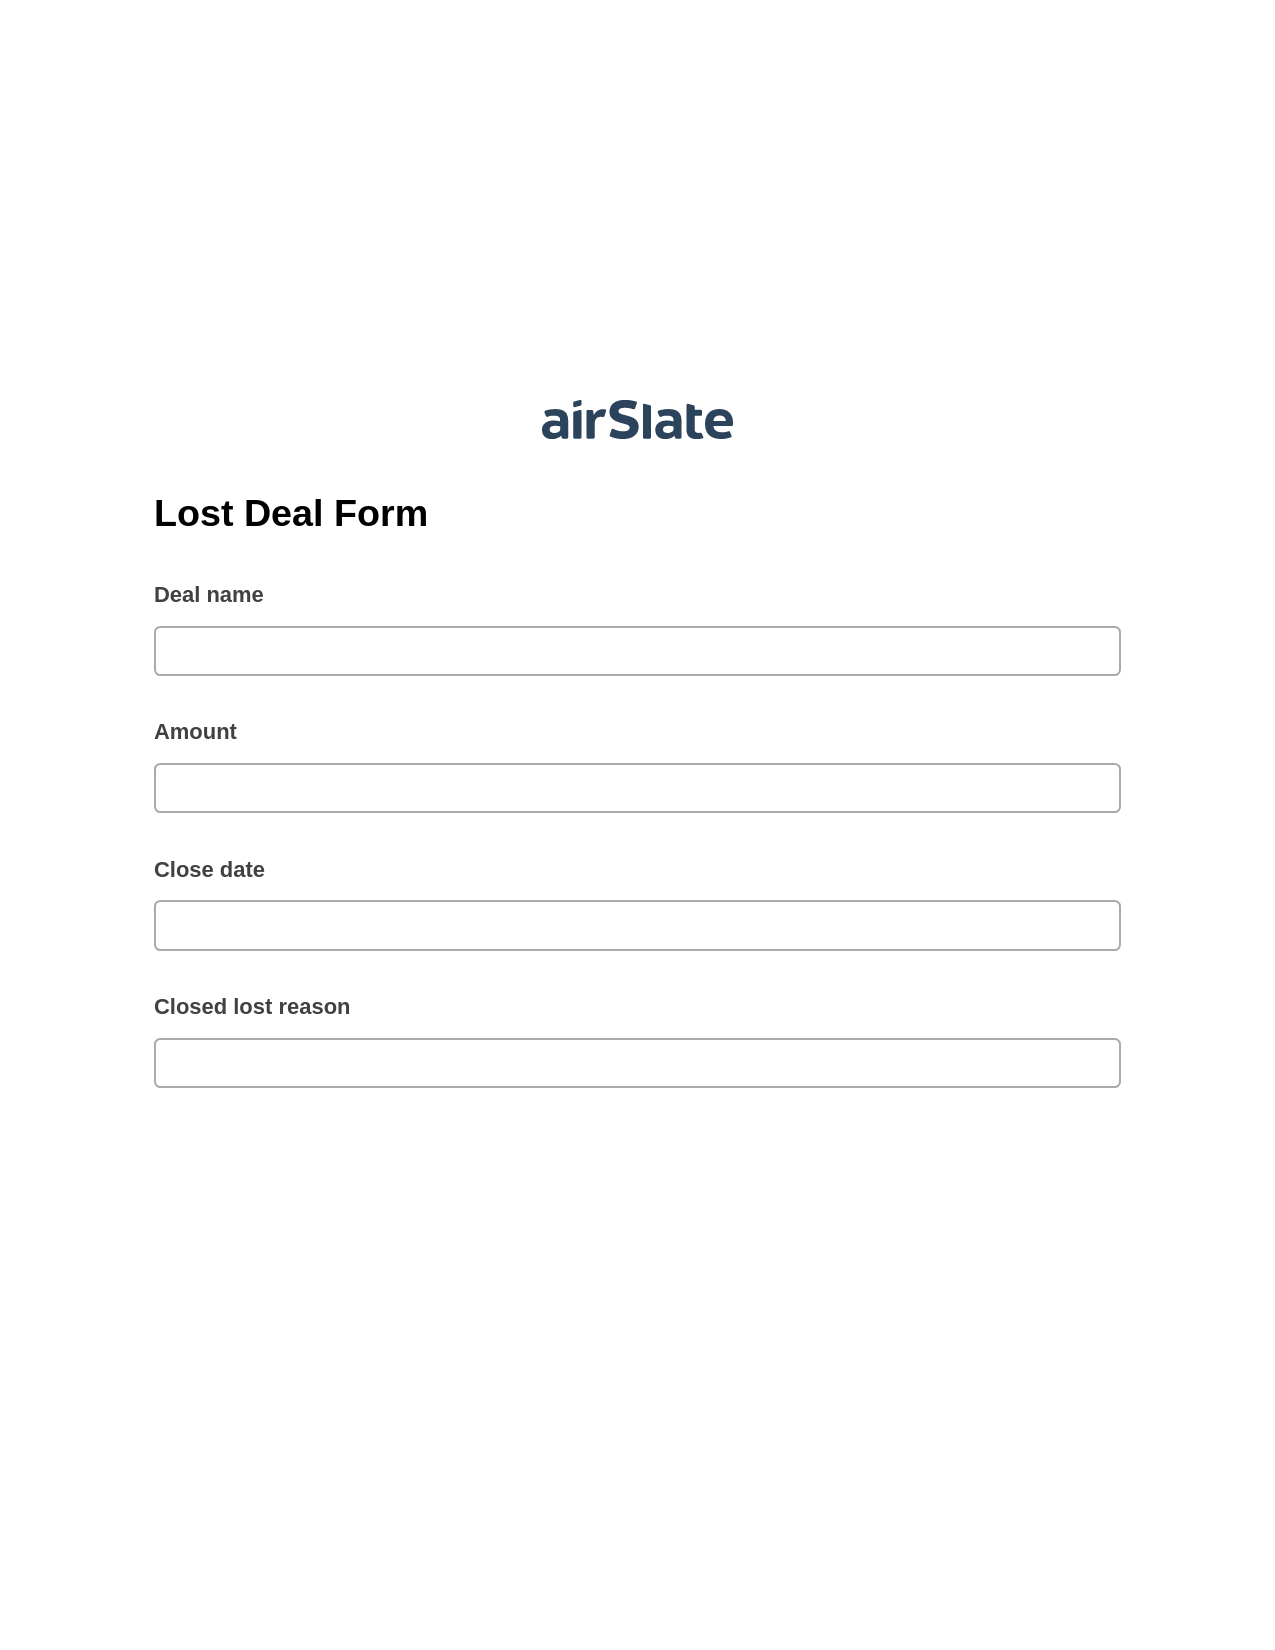 Lost Deal Form Prefill from NetSuite records, Add Tags to Slate Bot, Archive to Box Bot